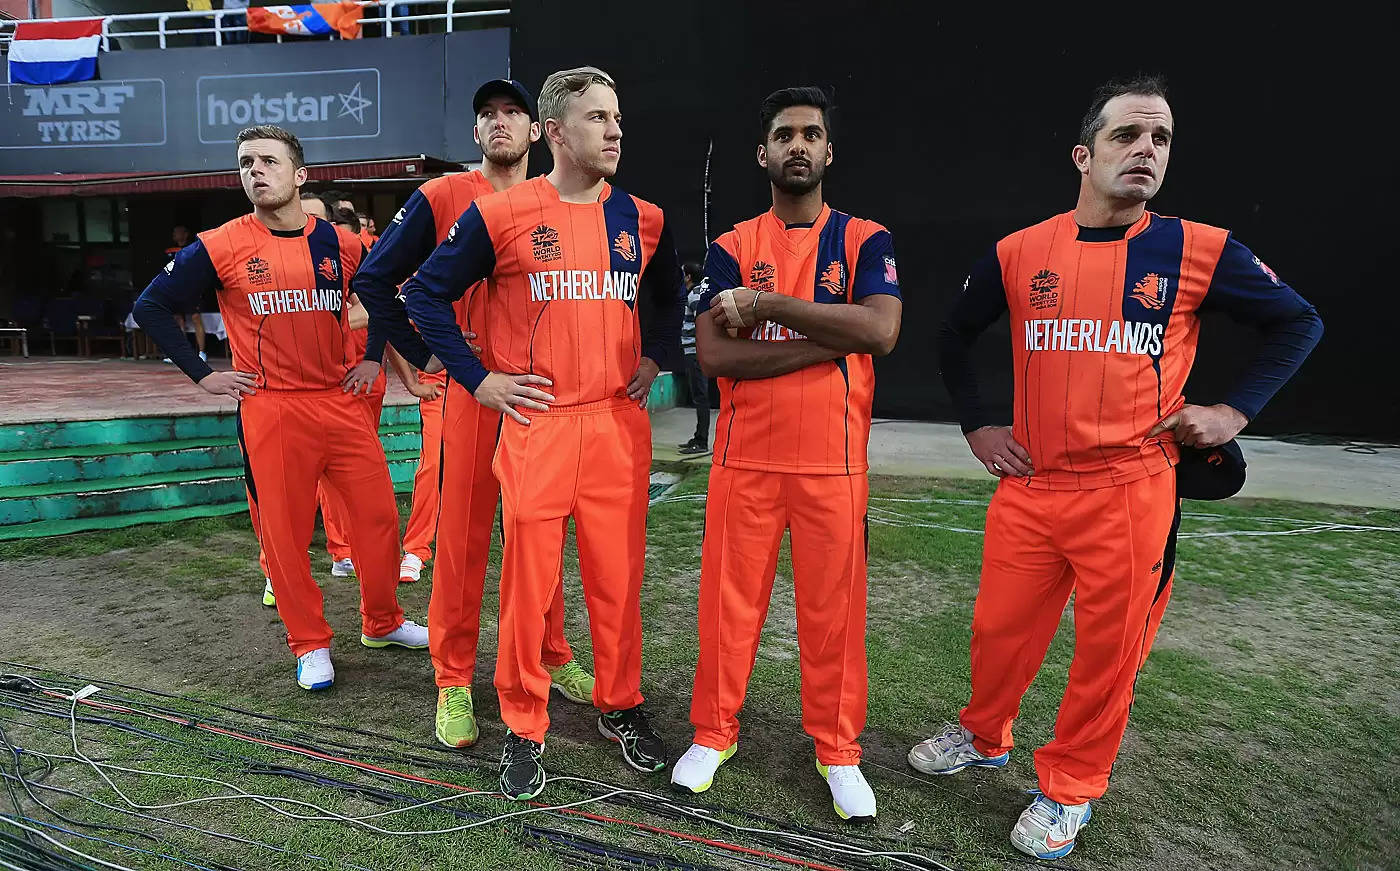 ICC T20 World Cup Qualifiers: Ireland vs Netherlands Dream11 Prediction, Fantasy Cricket Tips, Playing XI, Team, Pitch Report and Weather Conditions